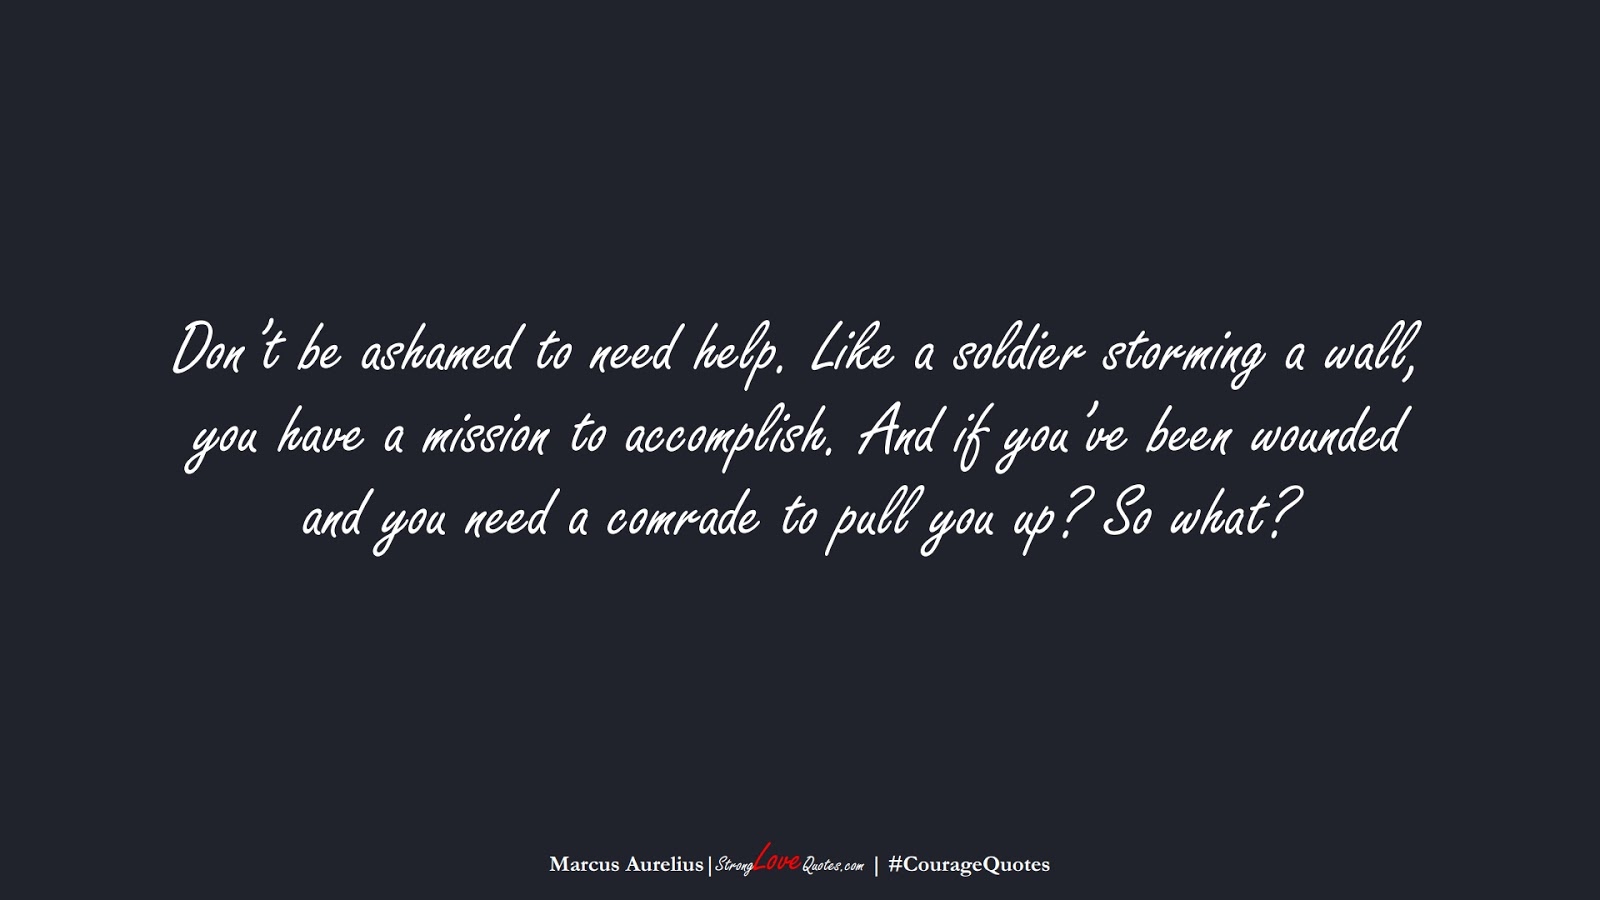 Don’t be ashamed to need help. Like a soldier storming a wall, you have a mission to accomplish. And if you’ve been wounded and you need a comrade to pull you up? So what? (Marcus Aurelius);  #CourageQuotes